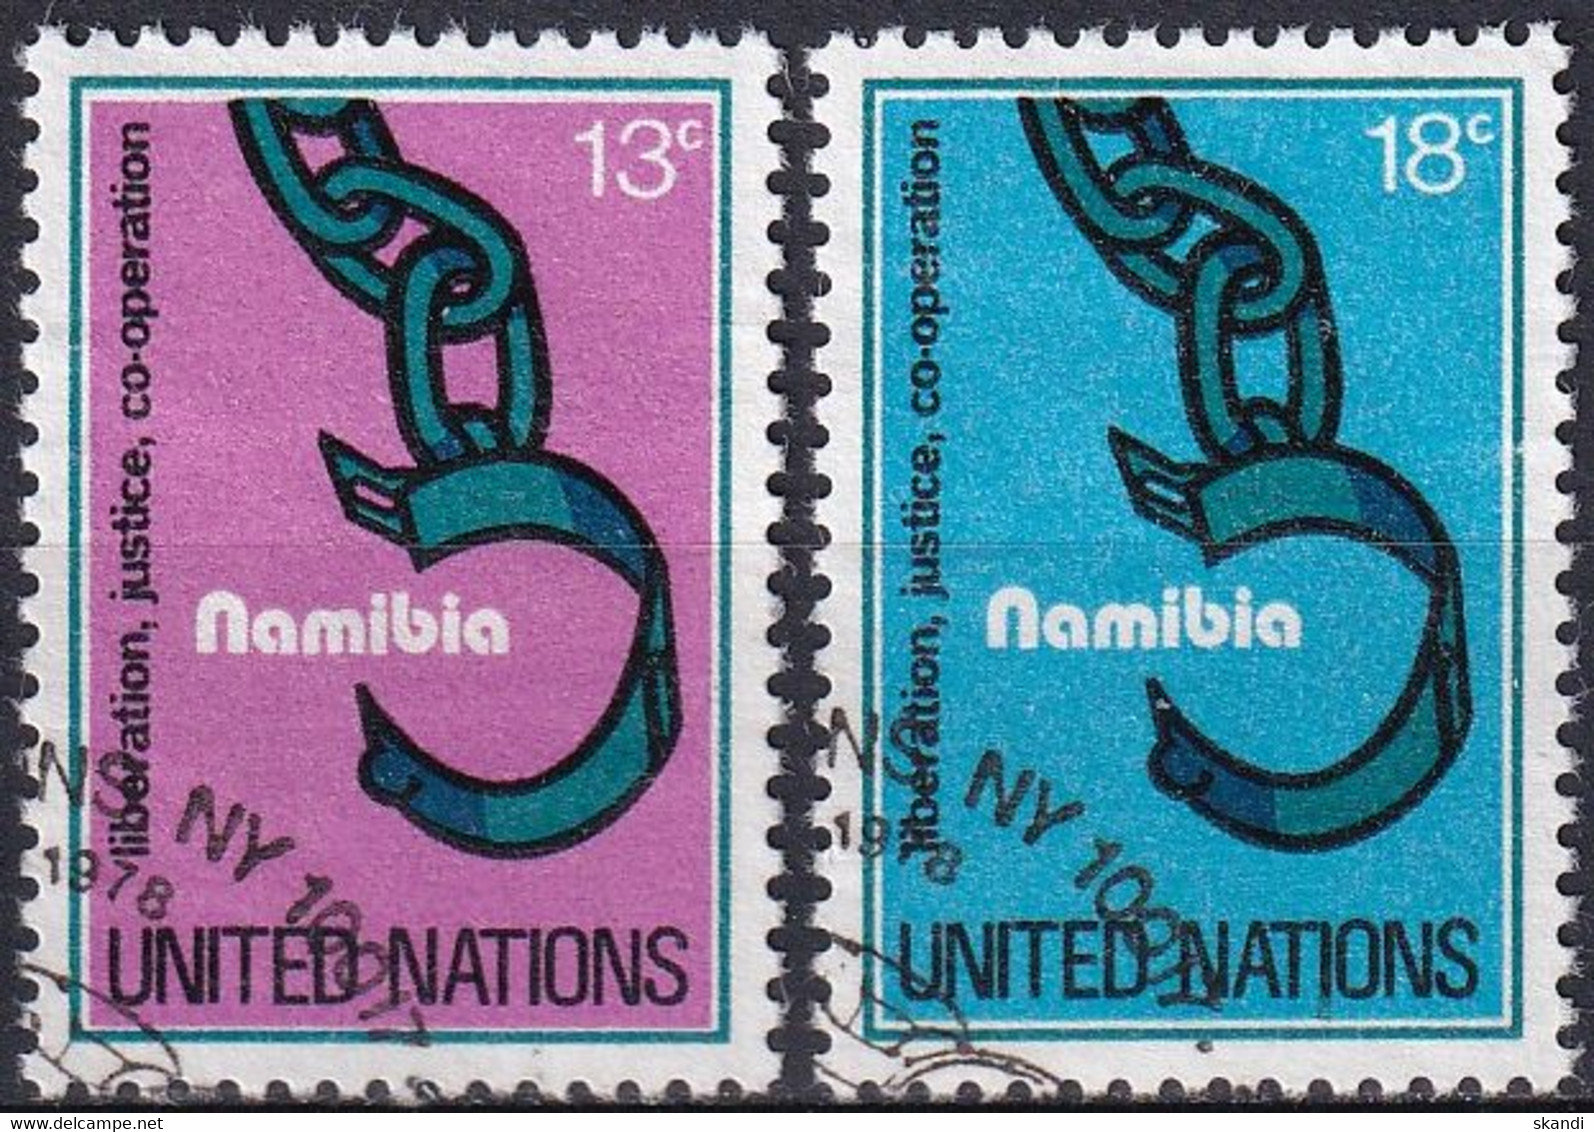 UNO NEW YORK 1978 Mi-Nr. 320/21 O Used - Aus Abo - Used Stamps